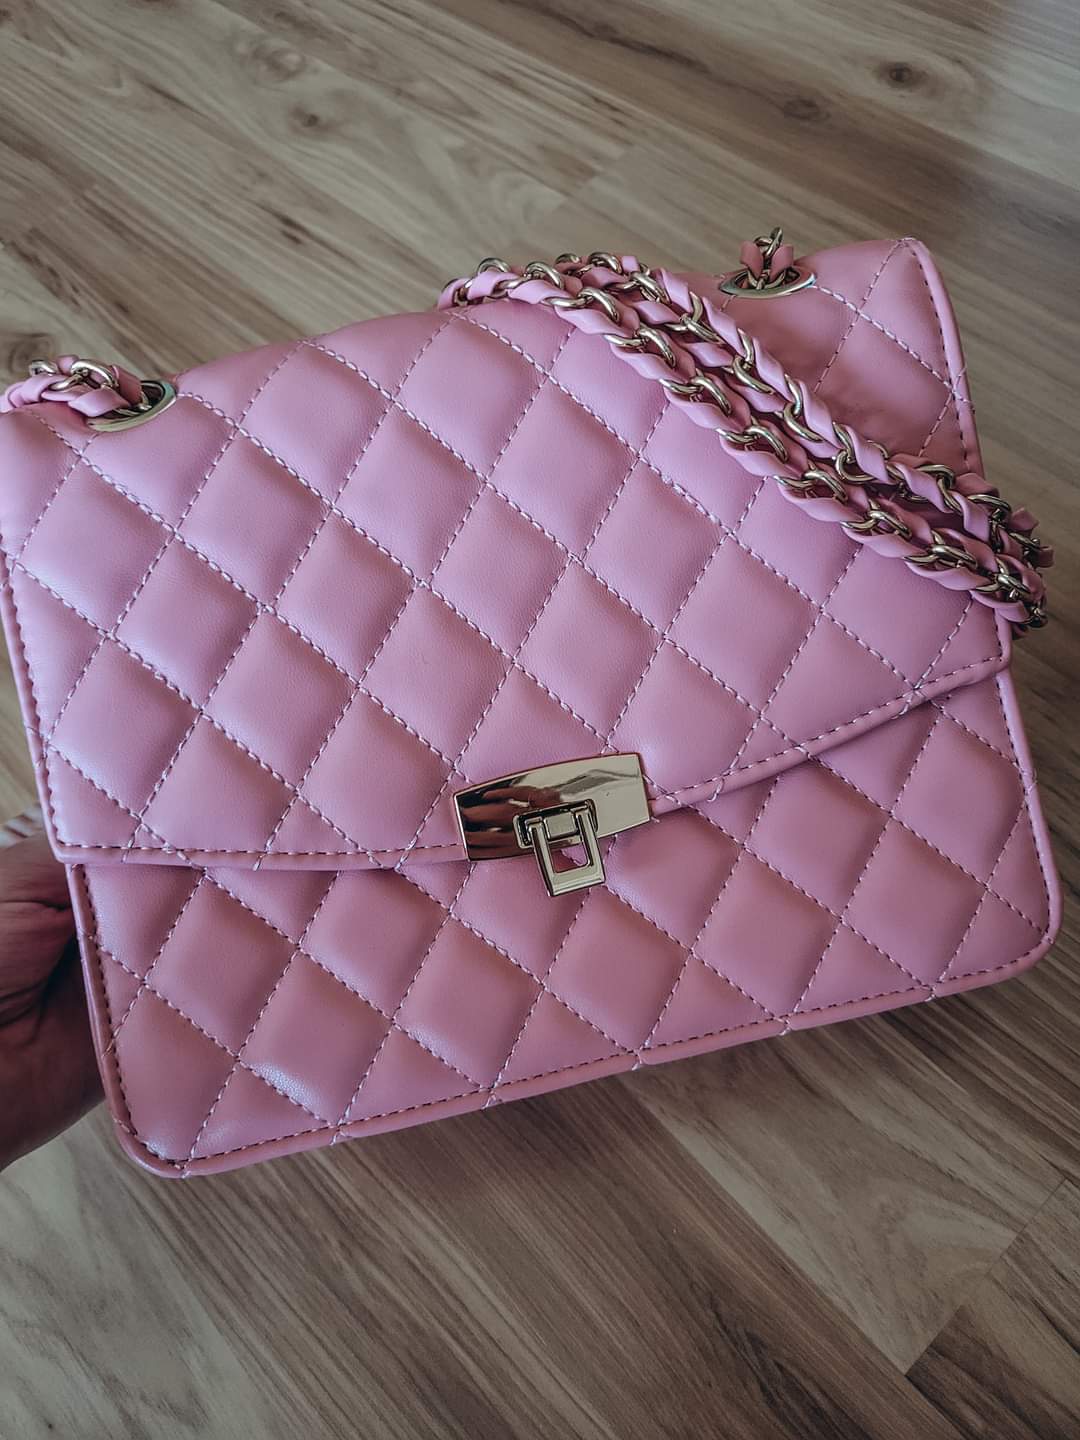 Pin by KIKI on Pink heart | Girly accessories, Pink bag, Bags designer  fashion